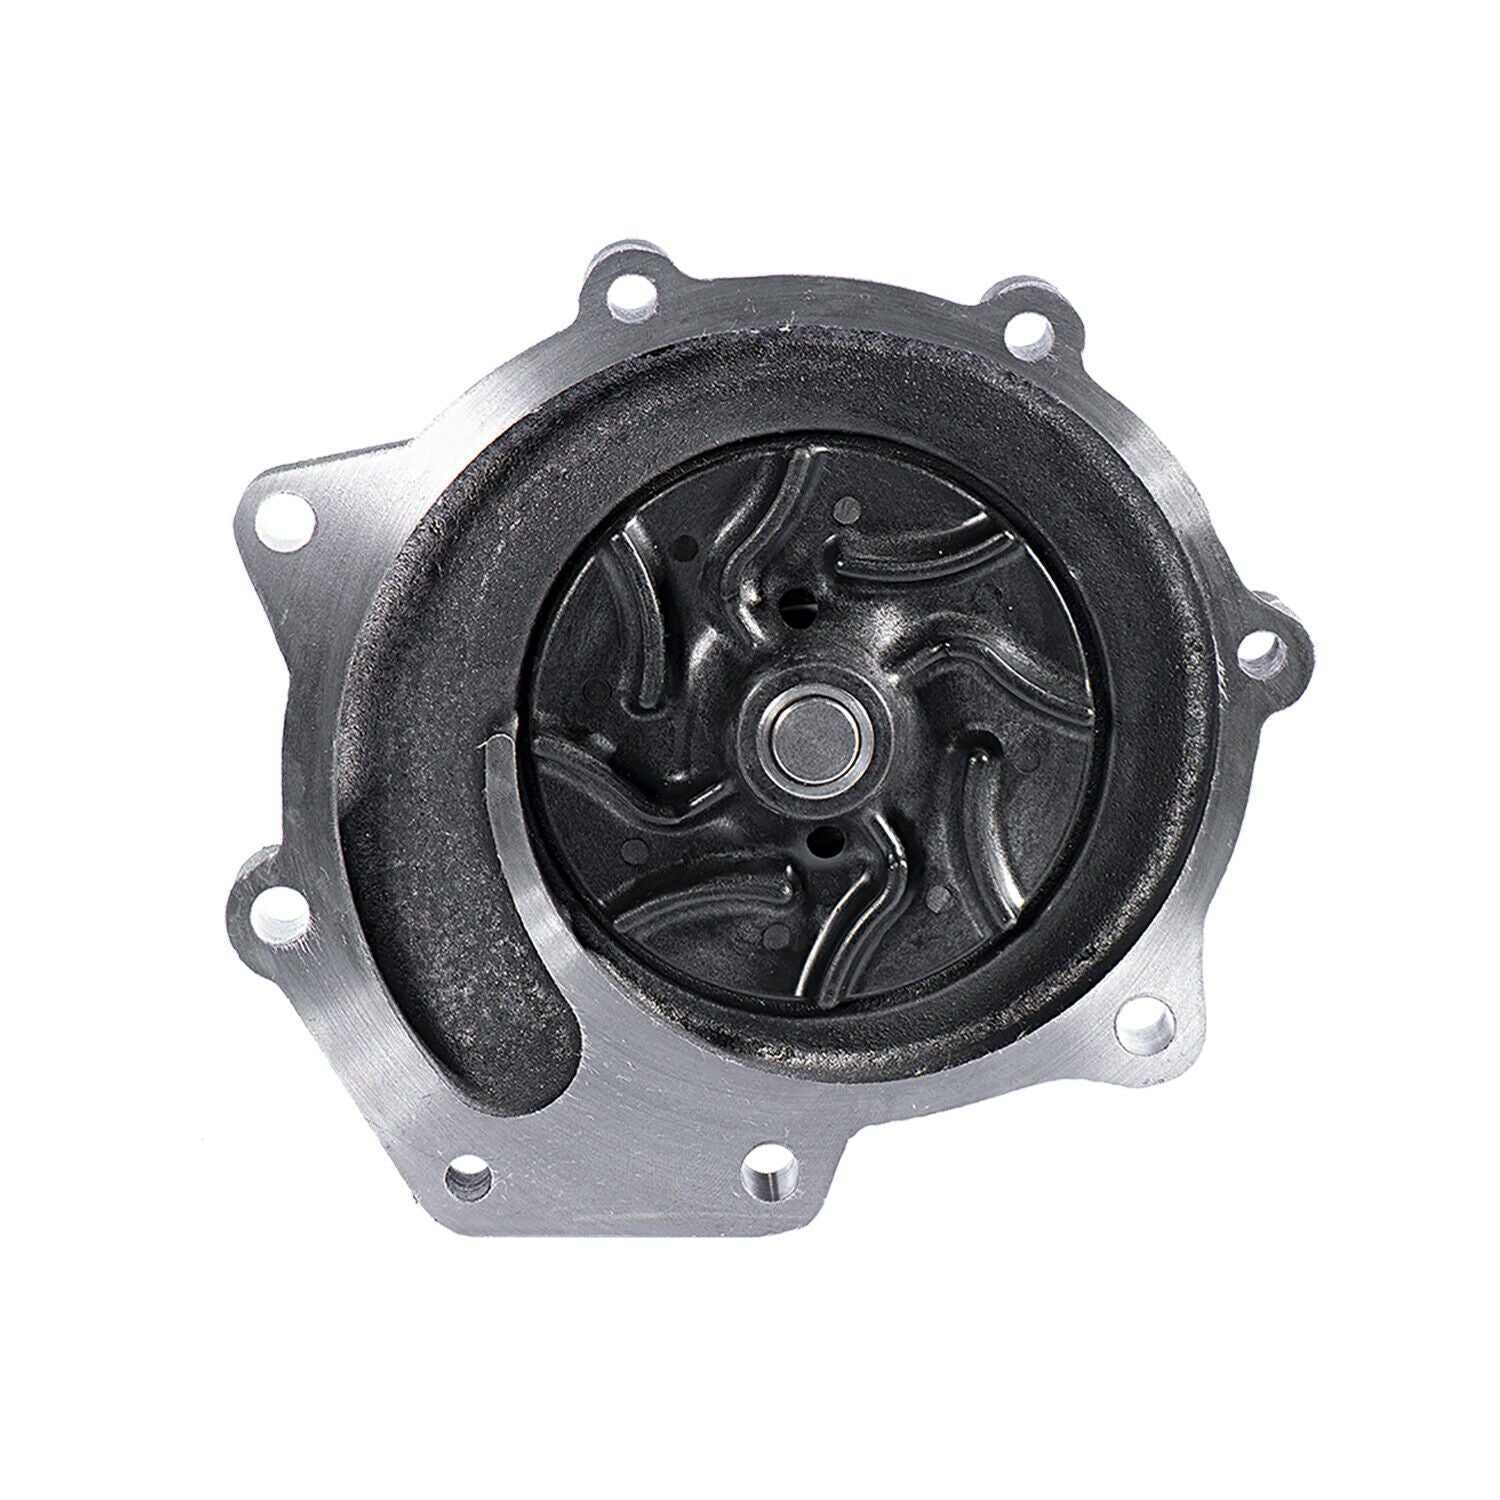 Water Pump Replacement For Ford 81863898 82845215 EAPN8A513F FAPN8A513GG